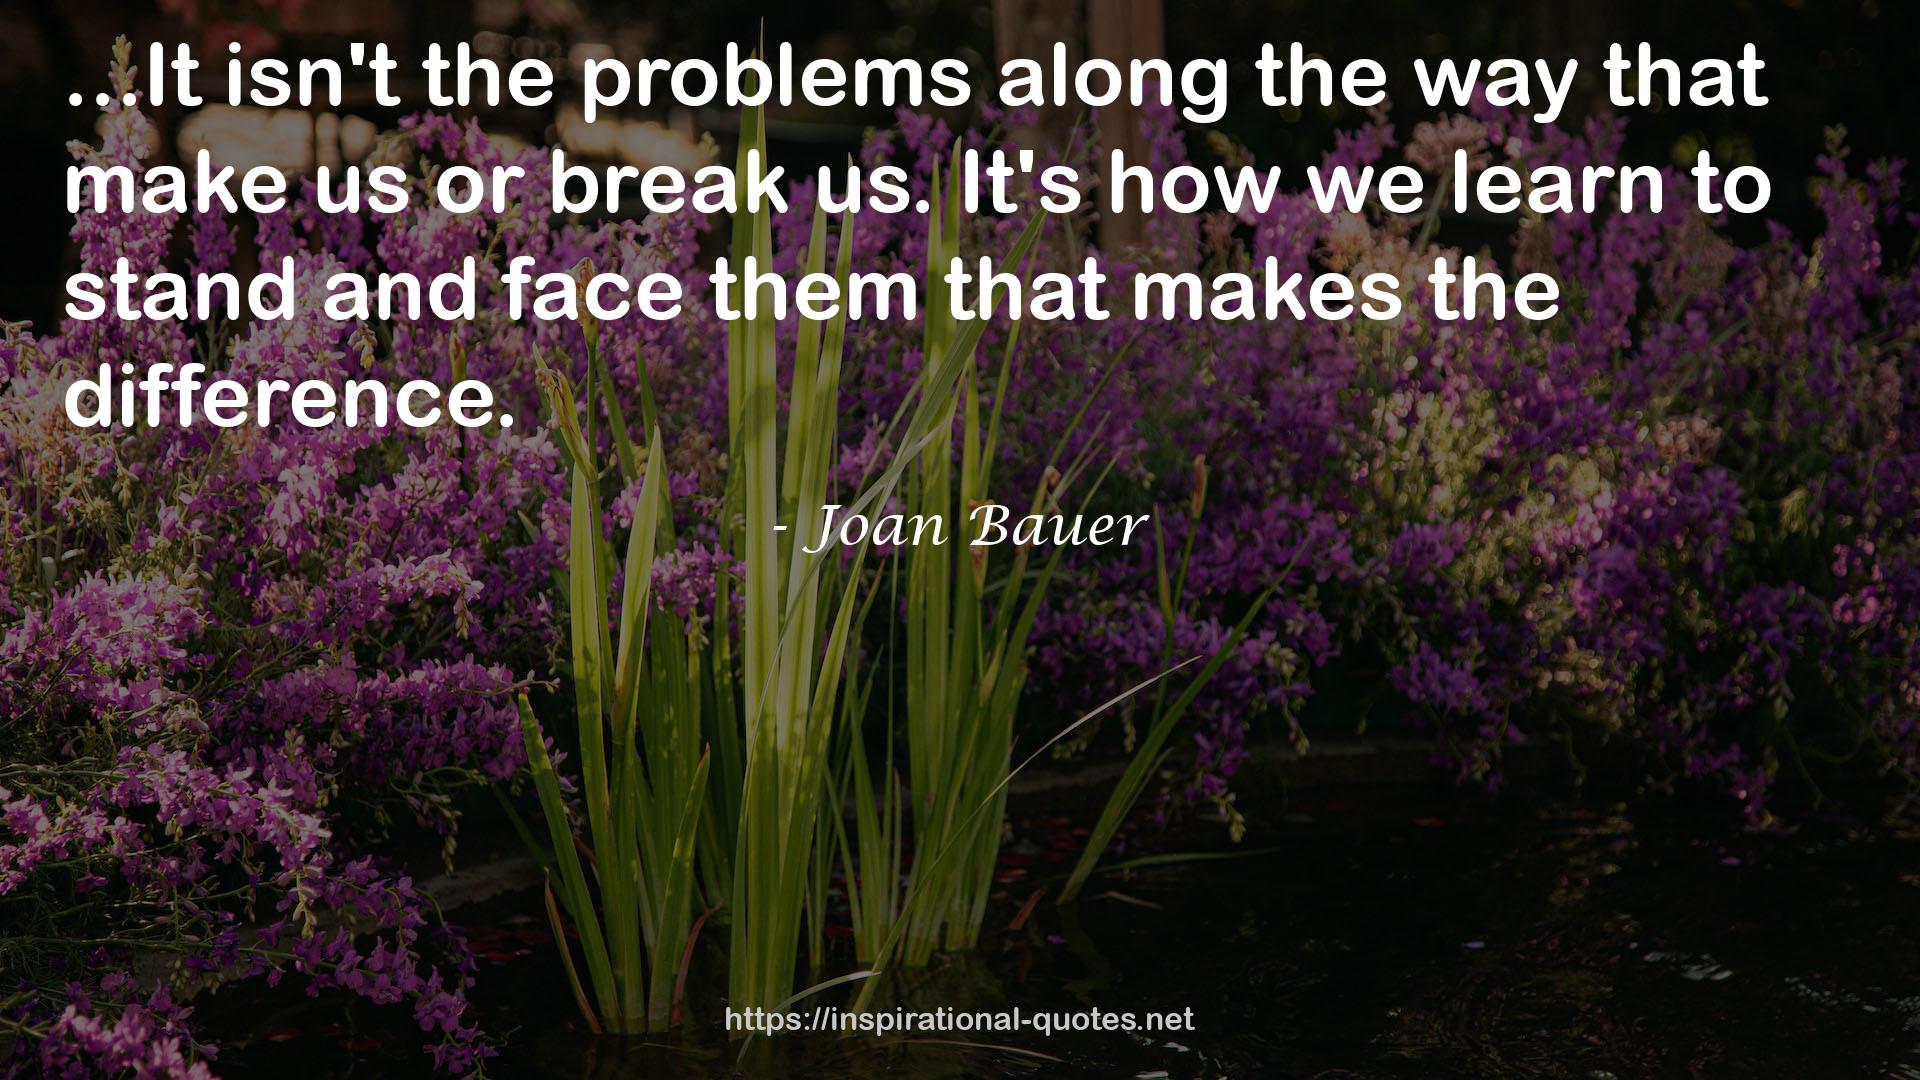 Joan Bauer QUOTES